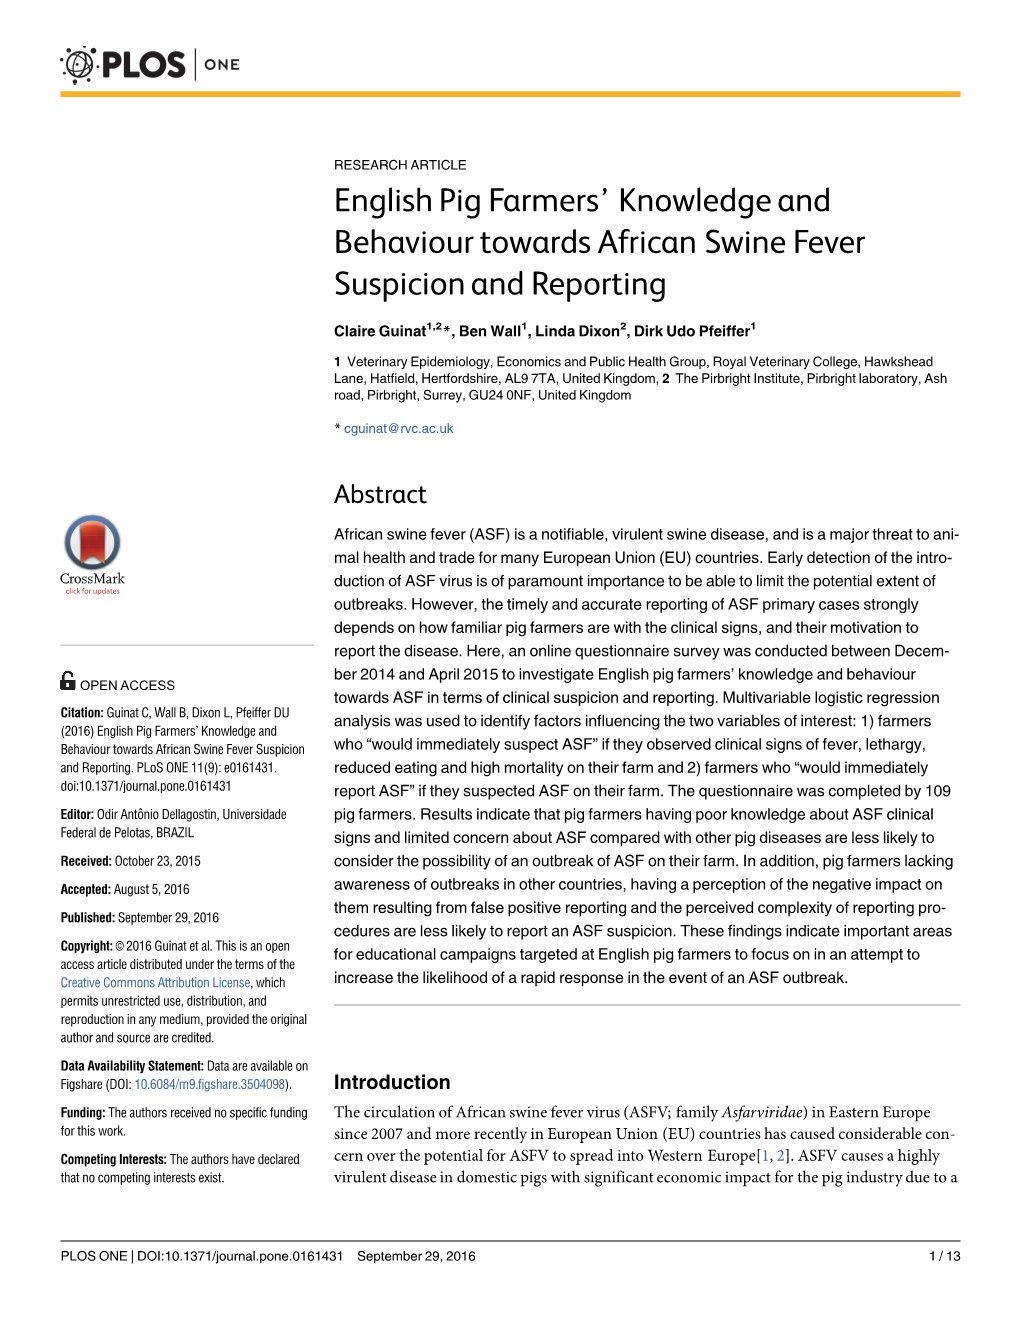 English Pig Farmers' Knowledge and Behaviour OPEN ACCESS Towards ASF in Terms of Clinical Suspicion and Reporting